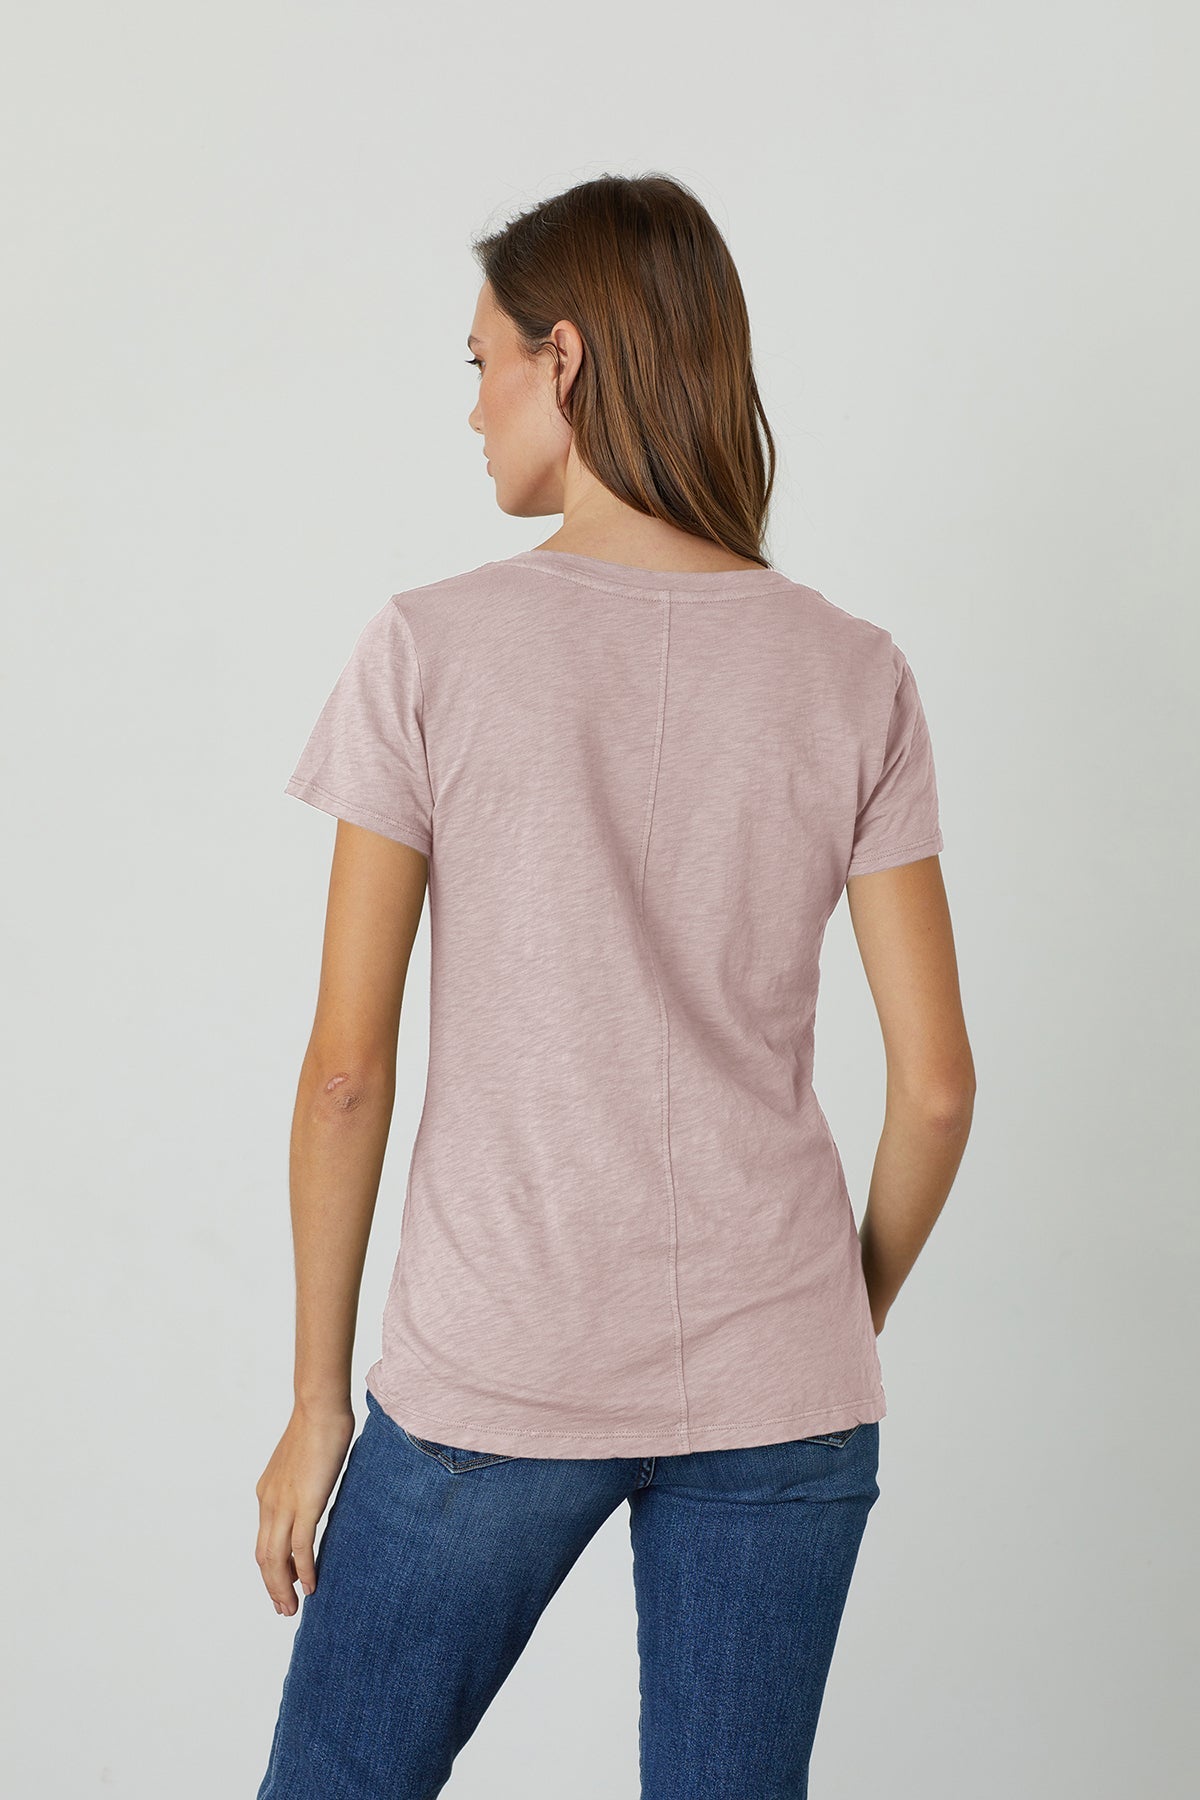 lilith in rosette back tee-26630611992769